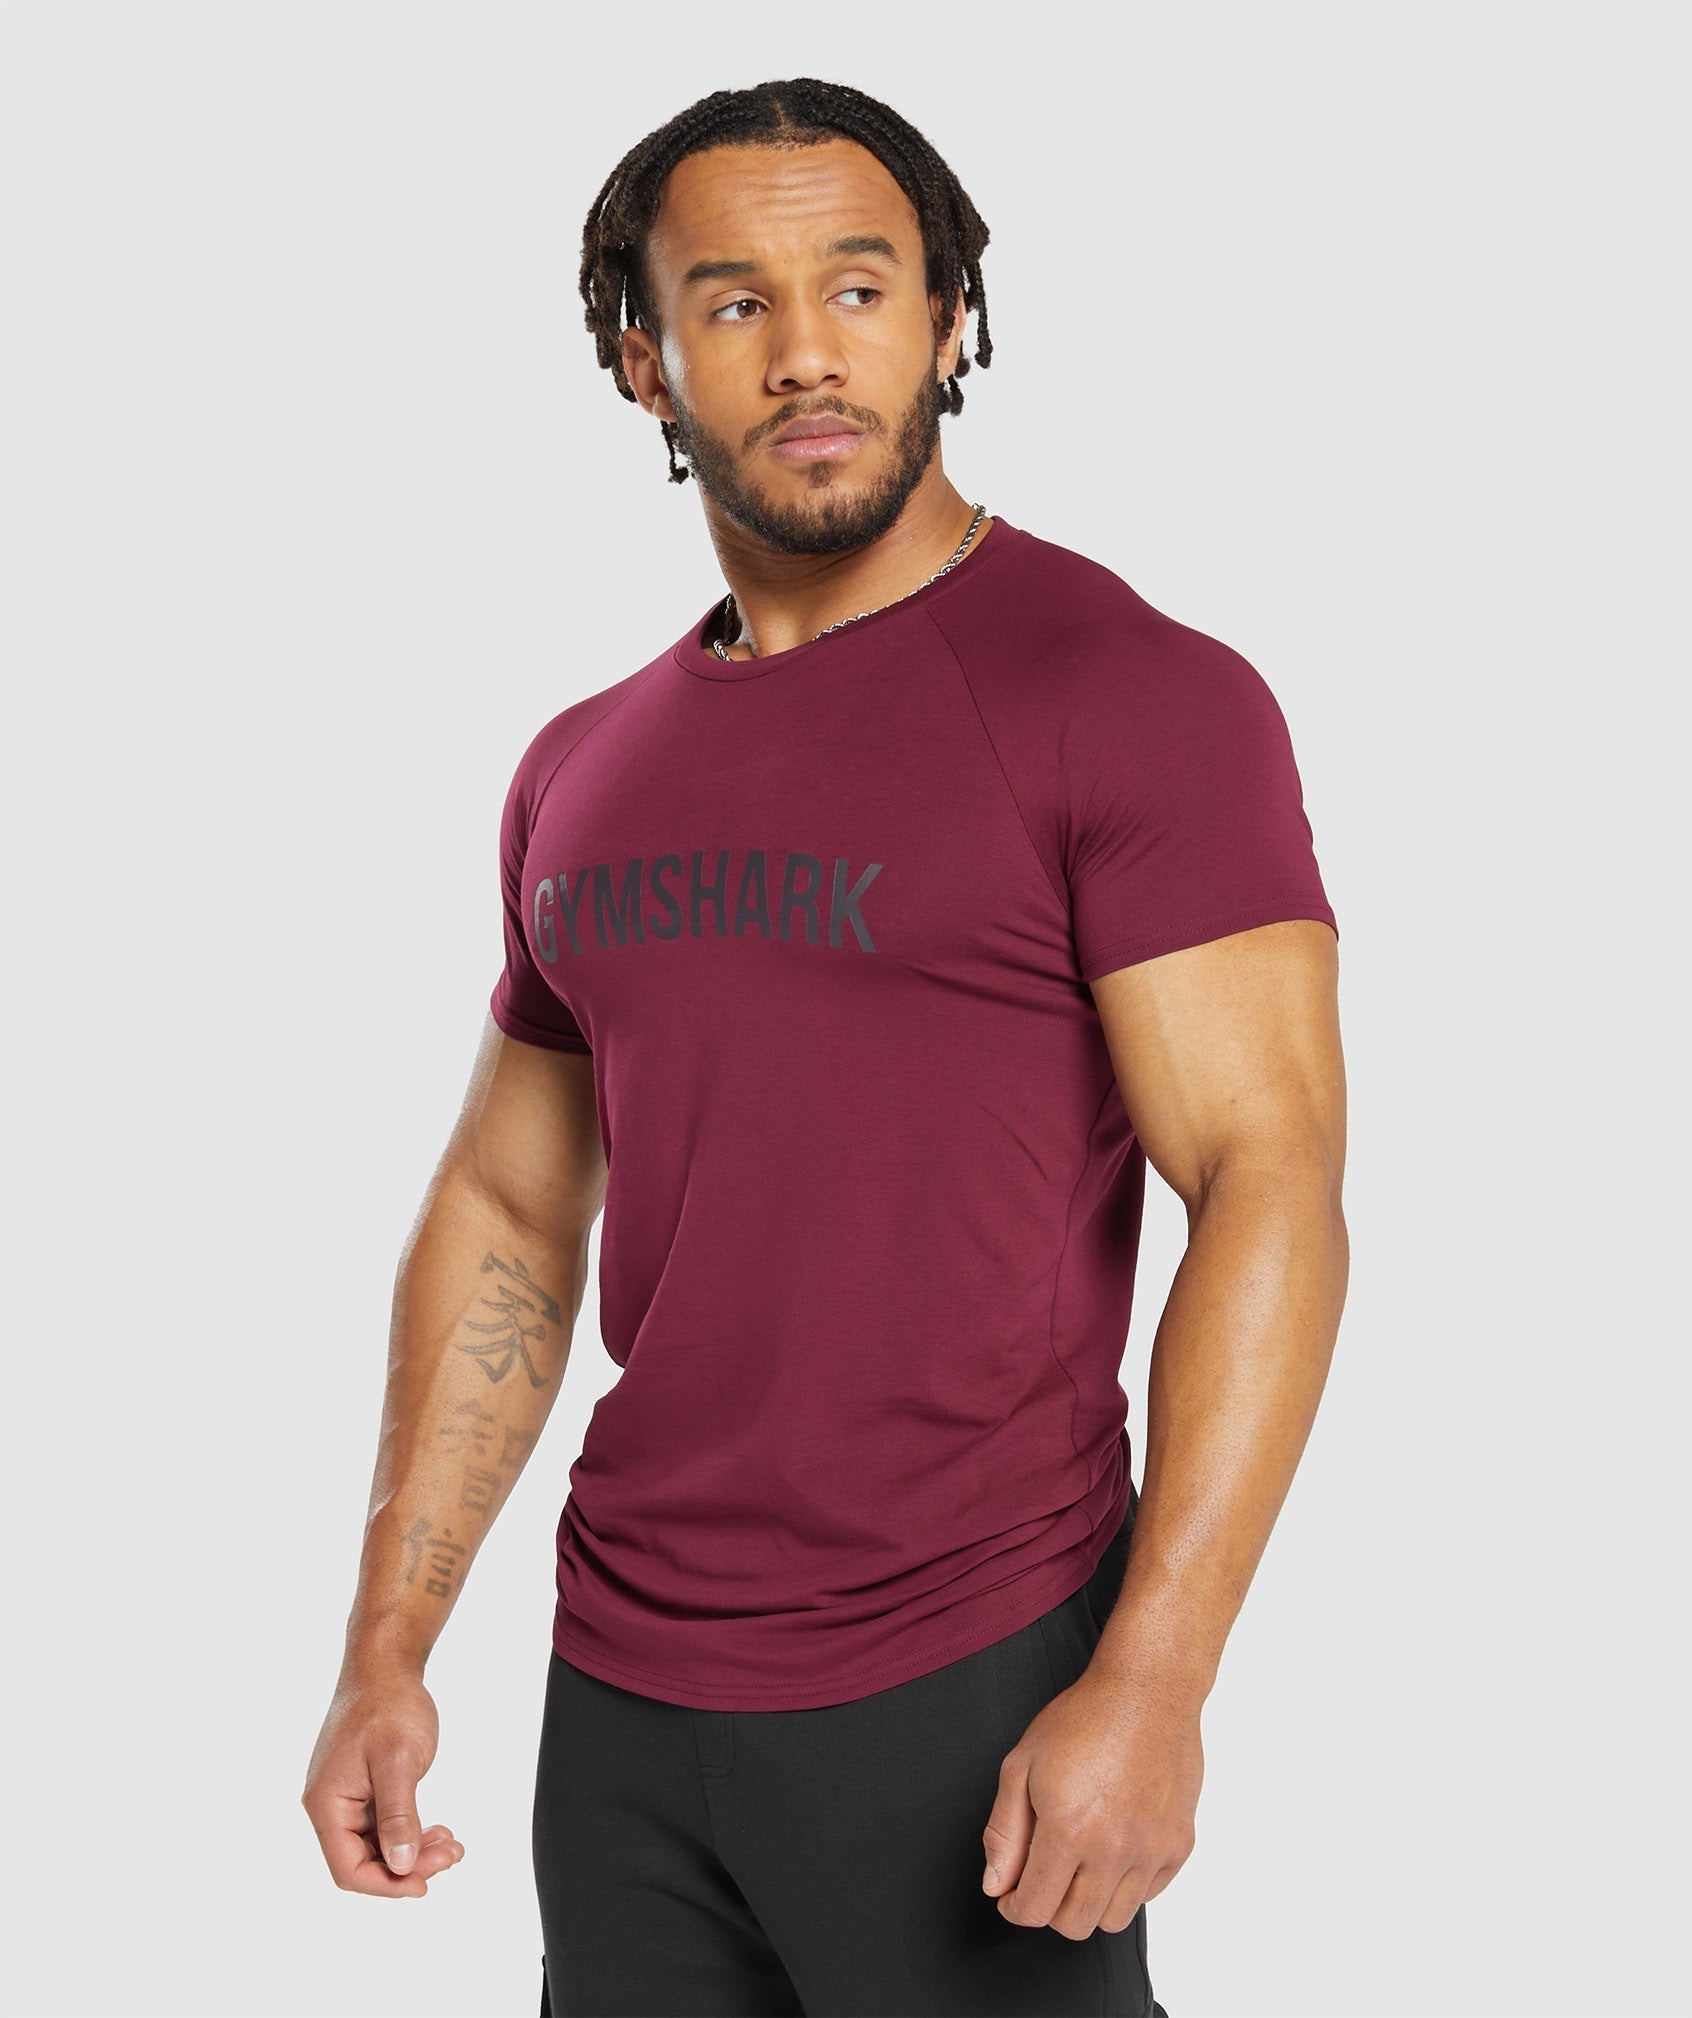 Apollo T-Shirt in Plum Pink - view 3